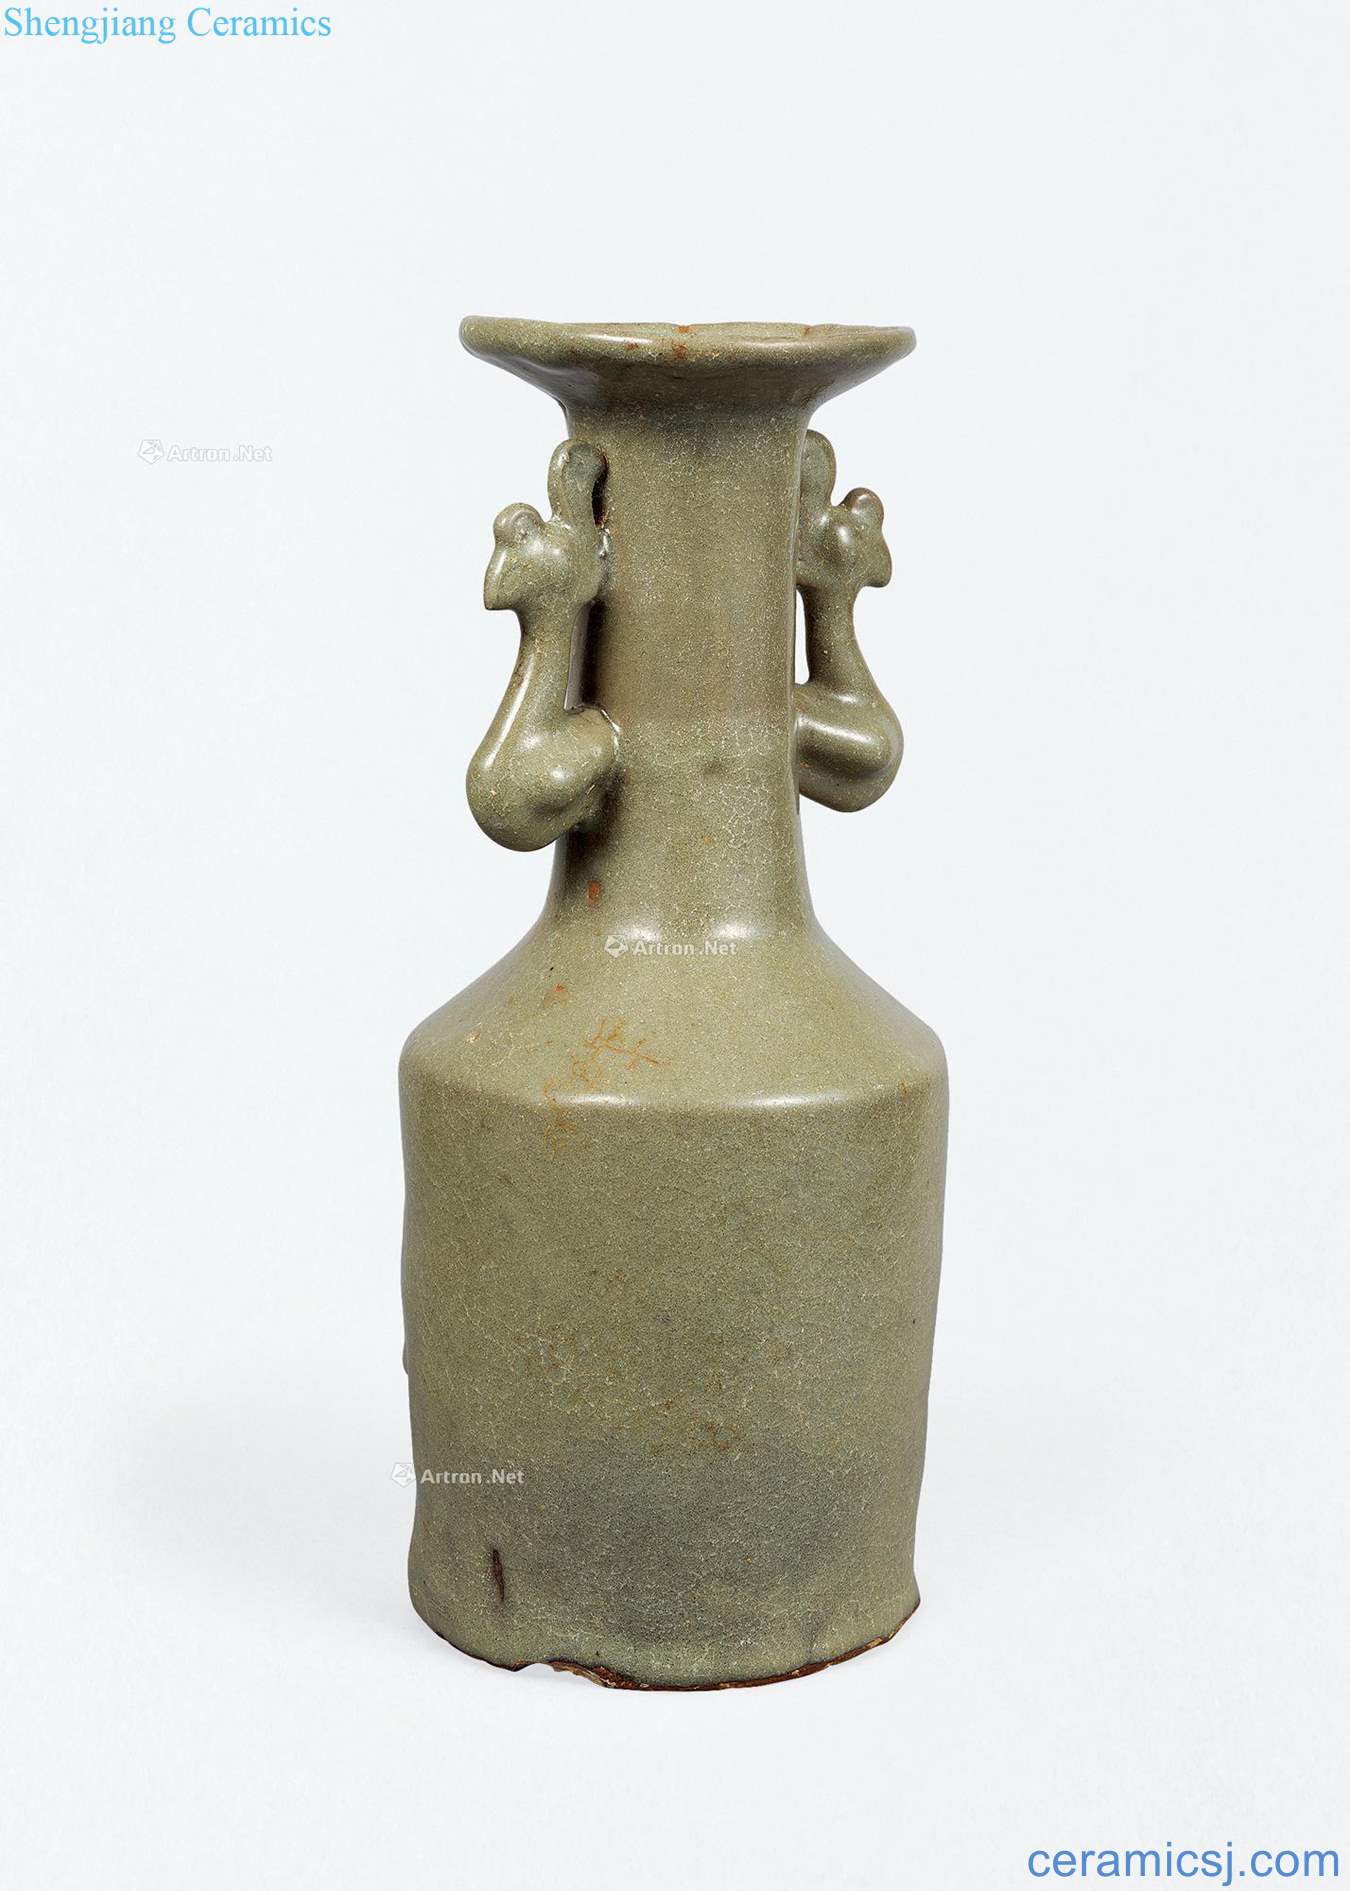 The southern song dynasty Longquan celadon glaze vase with a chicken